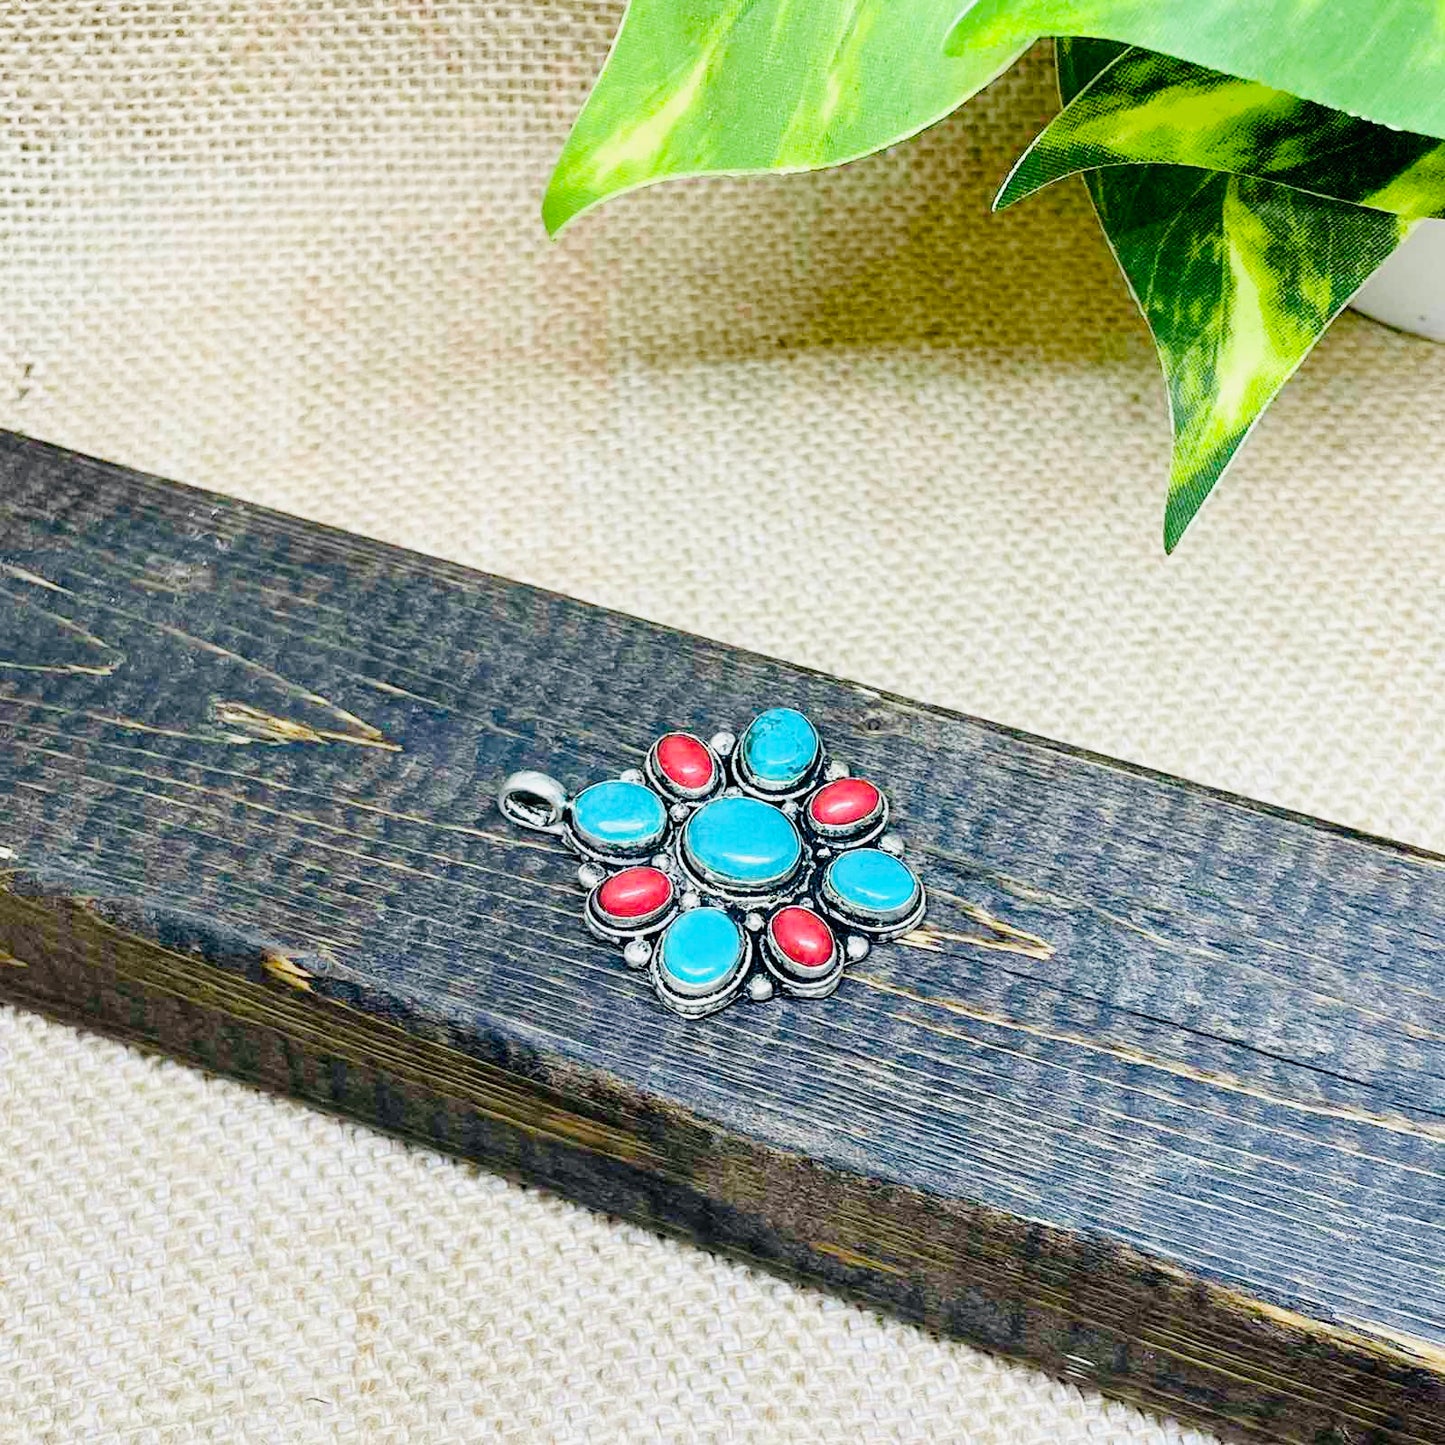 Vintage Turquoise/Coral Necklace, Tibetan Silver Pendant, Bohemian Jewelry, Ethnic Pendant, Gift For Her, Handmade Boho Style